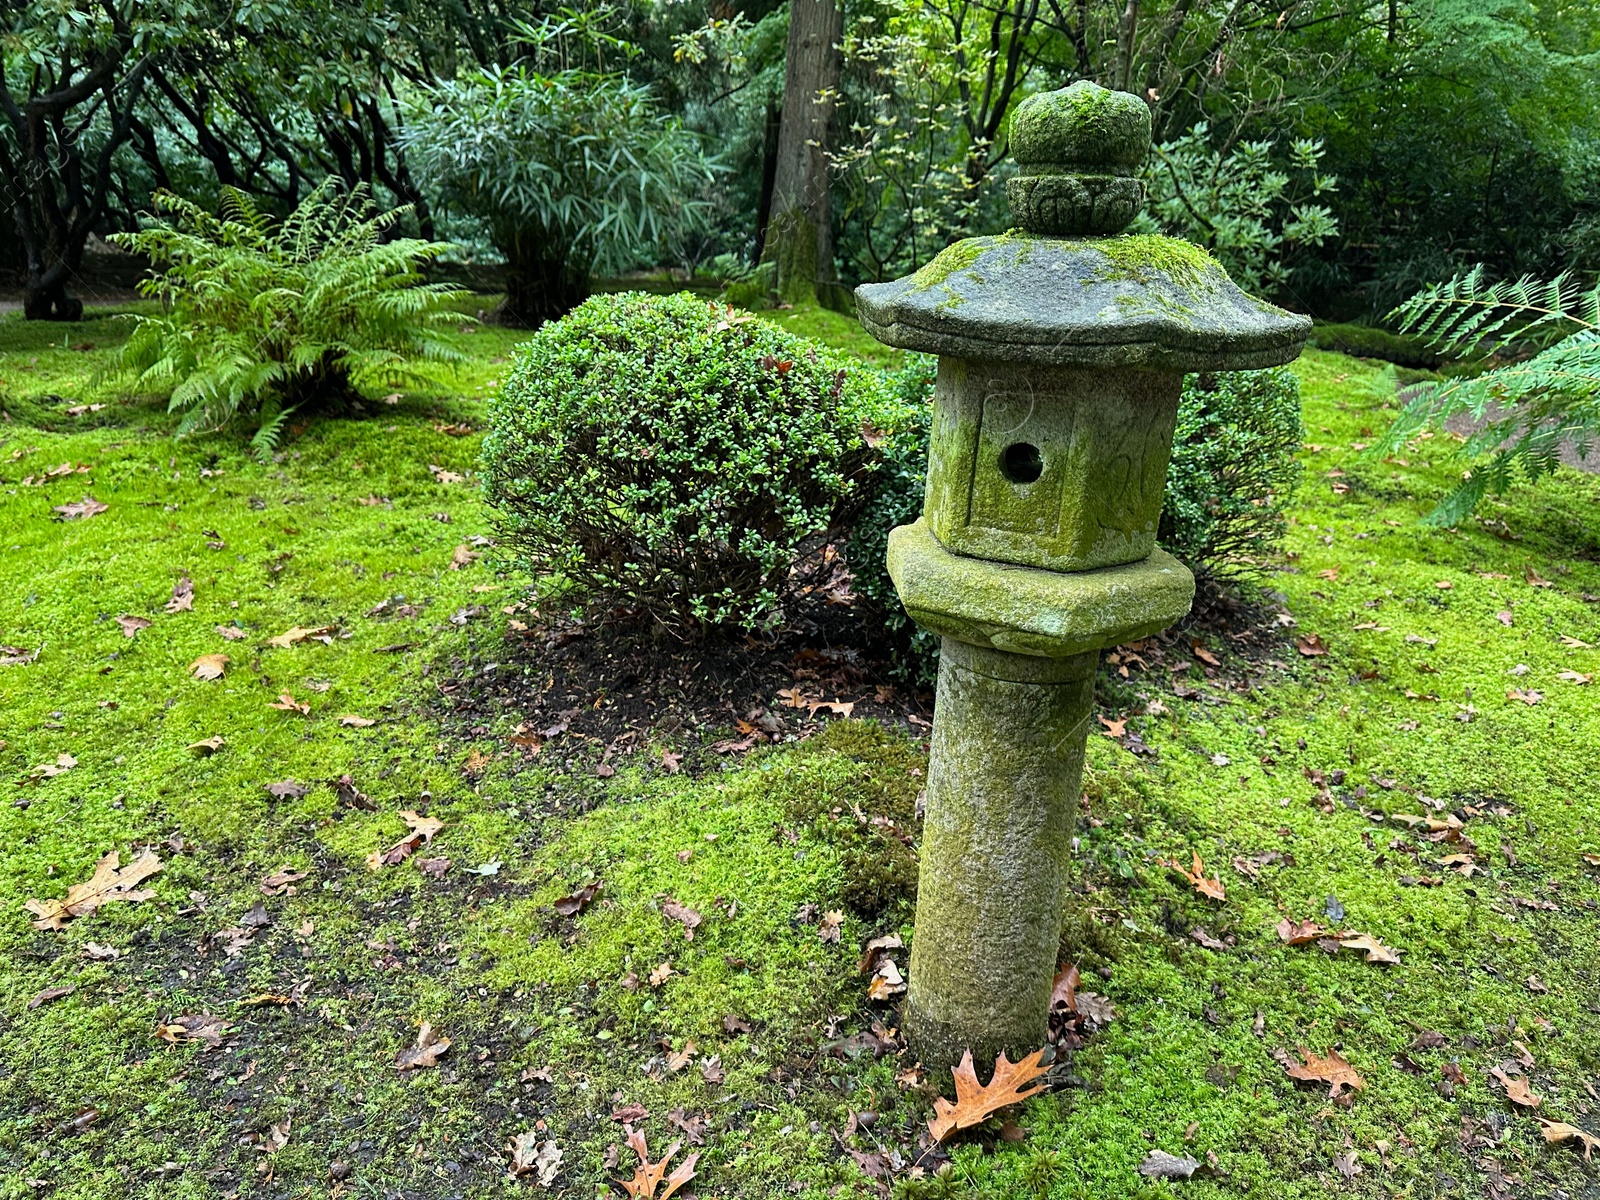 Photo of Stone lantern, bright moss, plants and fallen leaves in Japanese garden